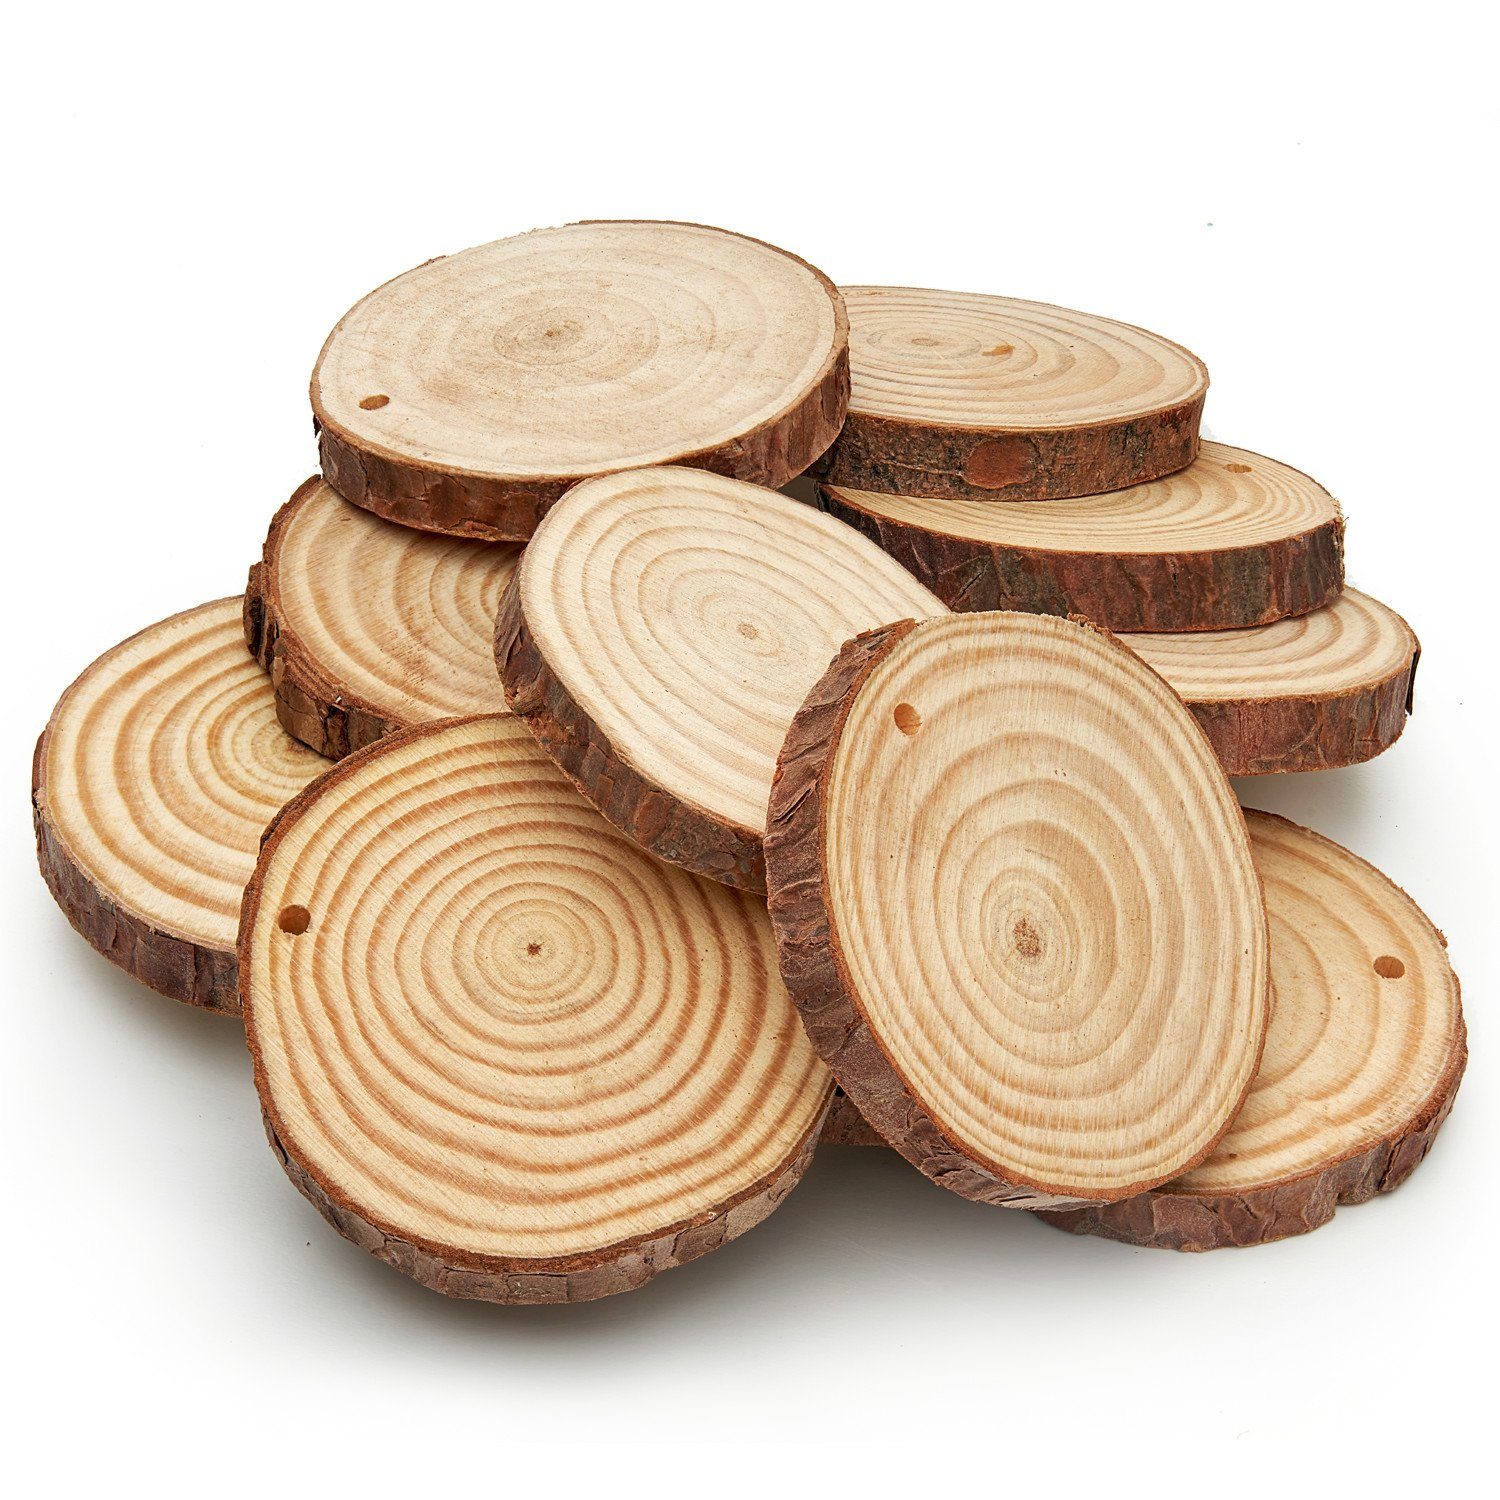  6 Pack Round Rustic Woods Slices, 7-8,Great for